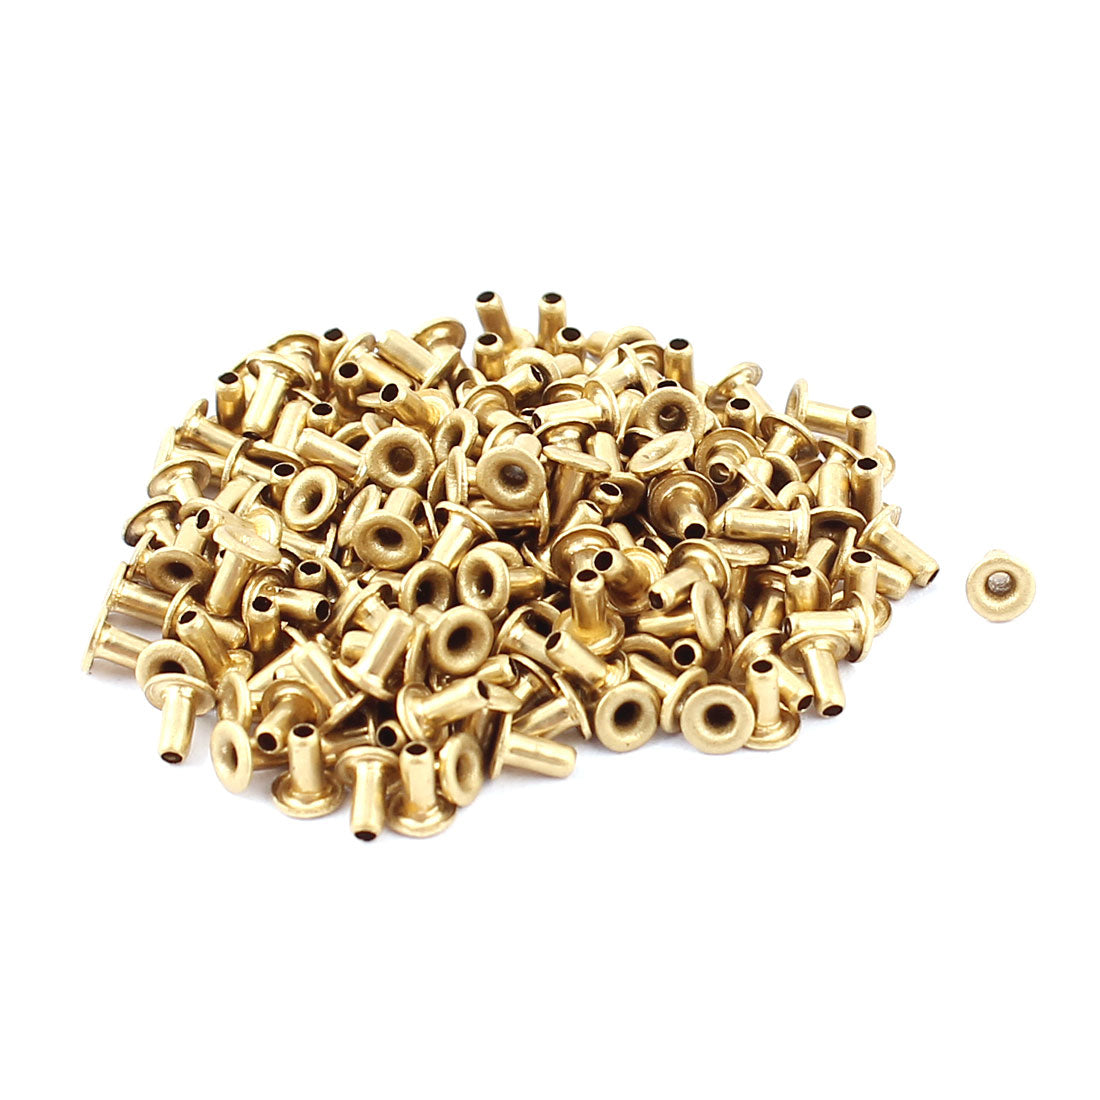 uxcell Uxcell 200pcs M1.5x3 Copper Via Vias Plated Through Hole Rivets Hollow Grommets PCB Circuit Board